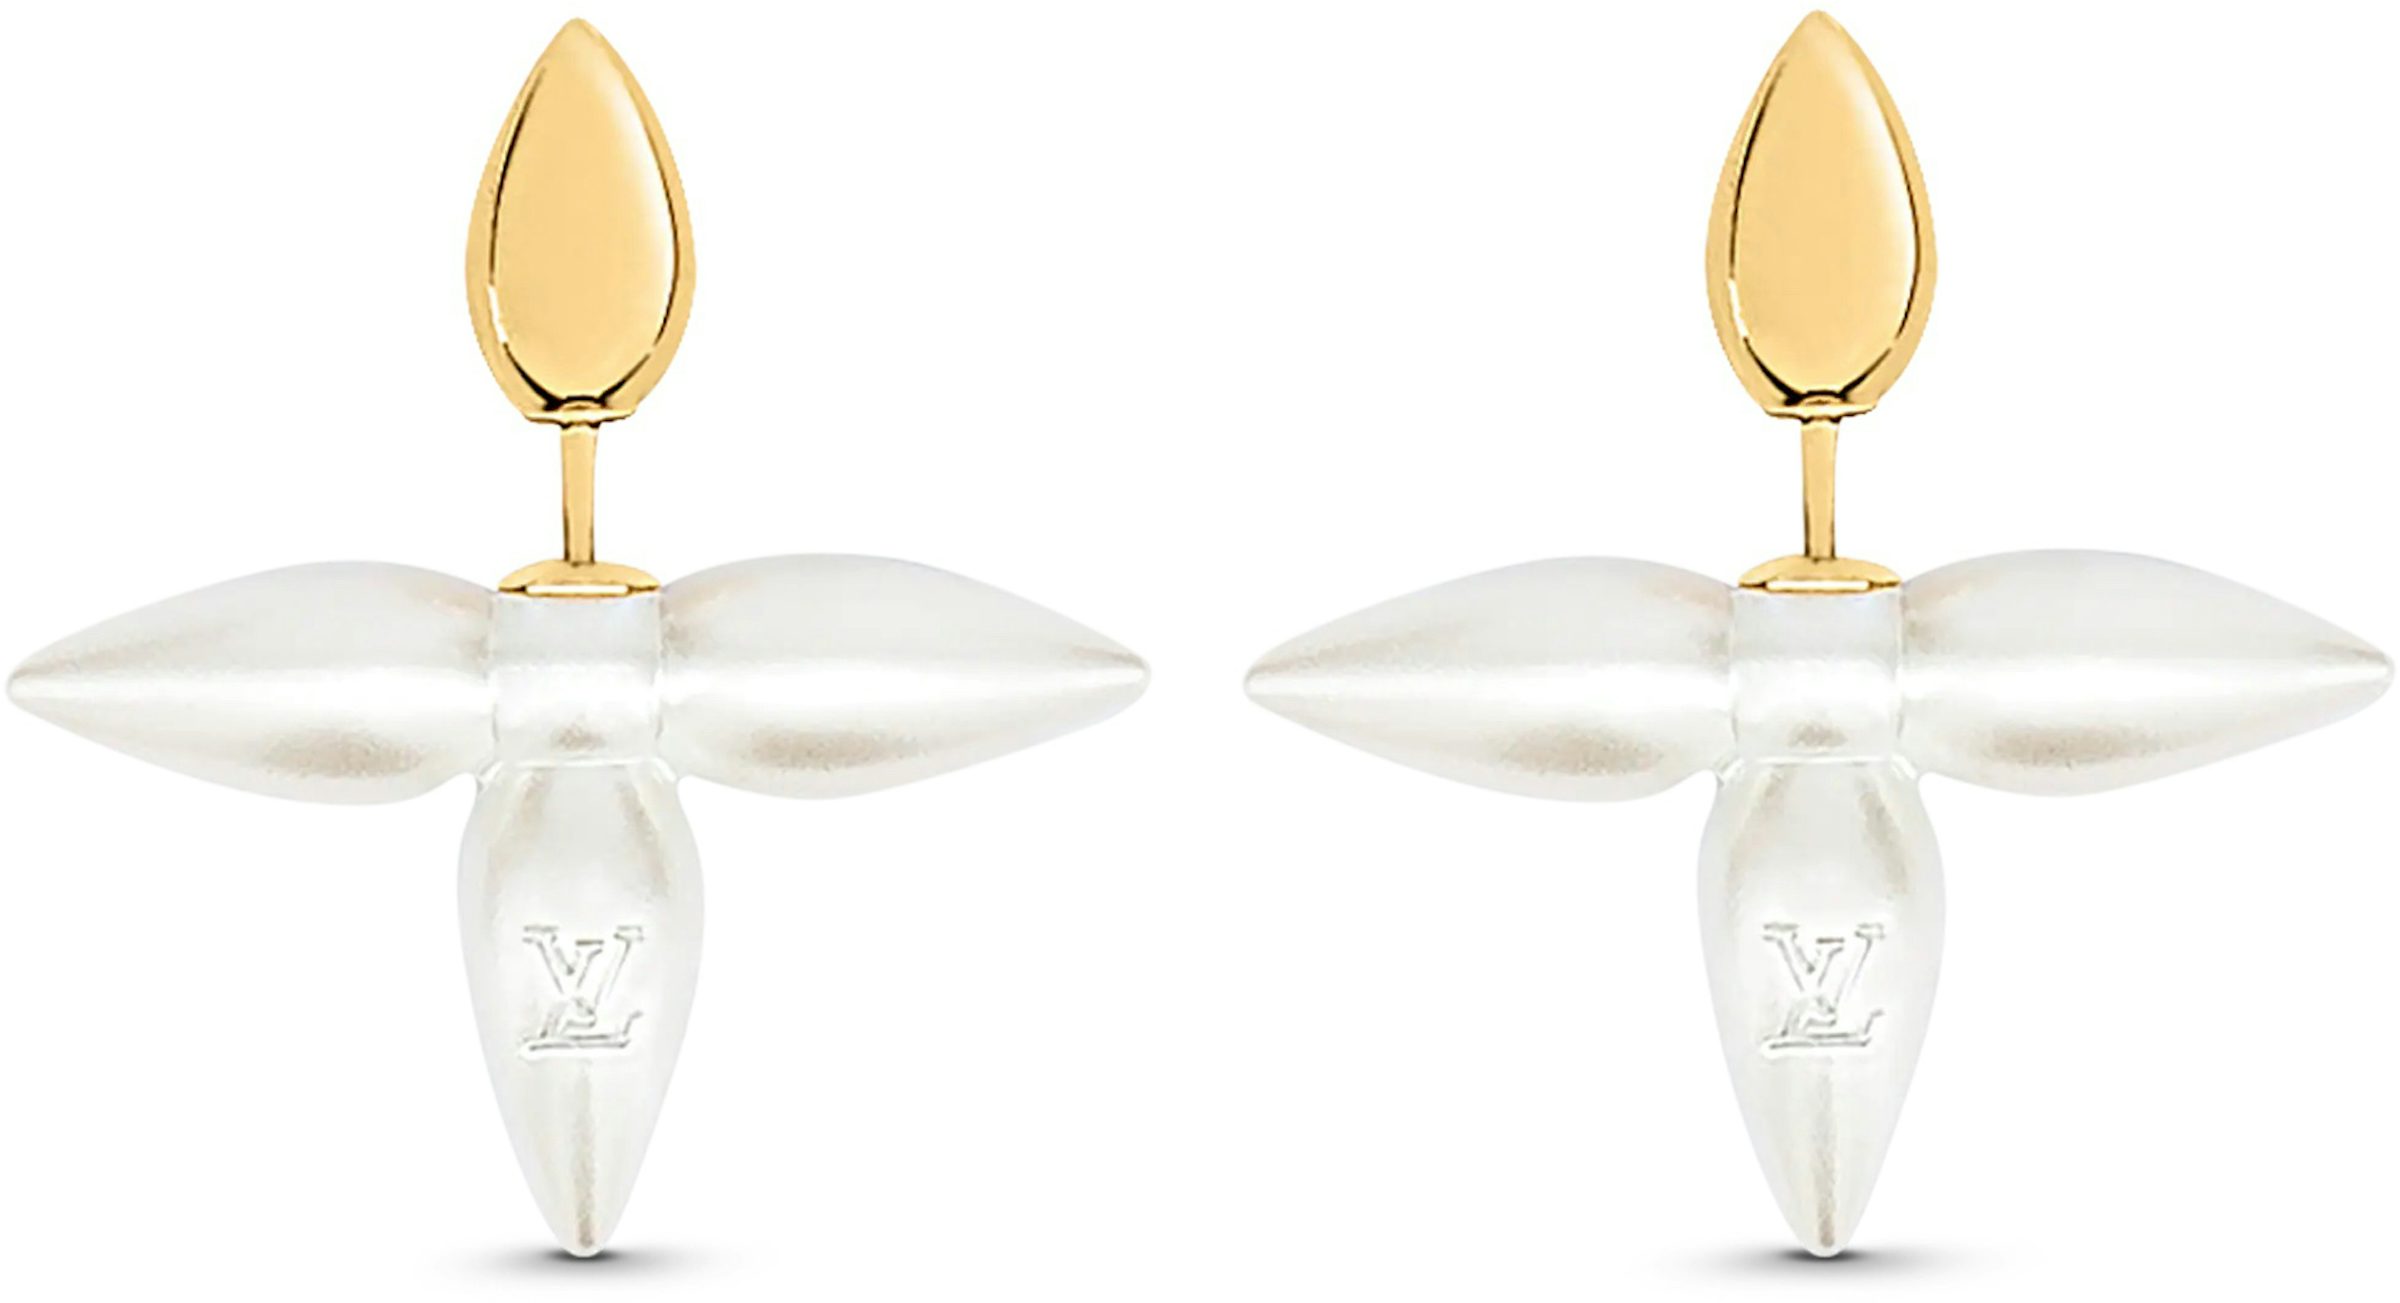 Louis Vuitton Louisette Earrings Gold/White in Gold Metal with